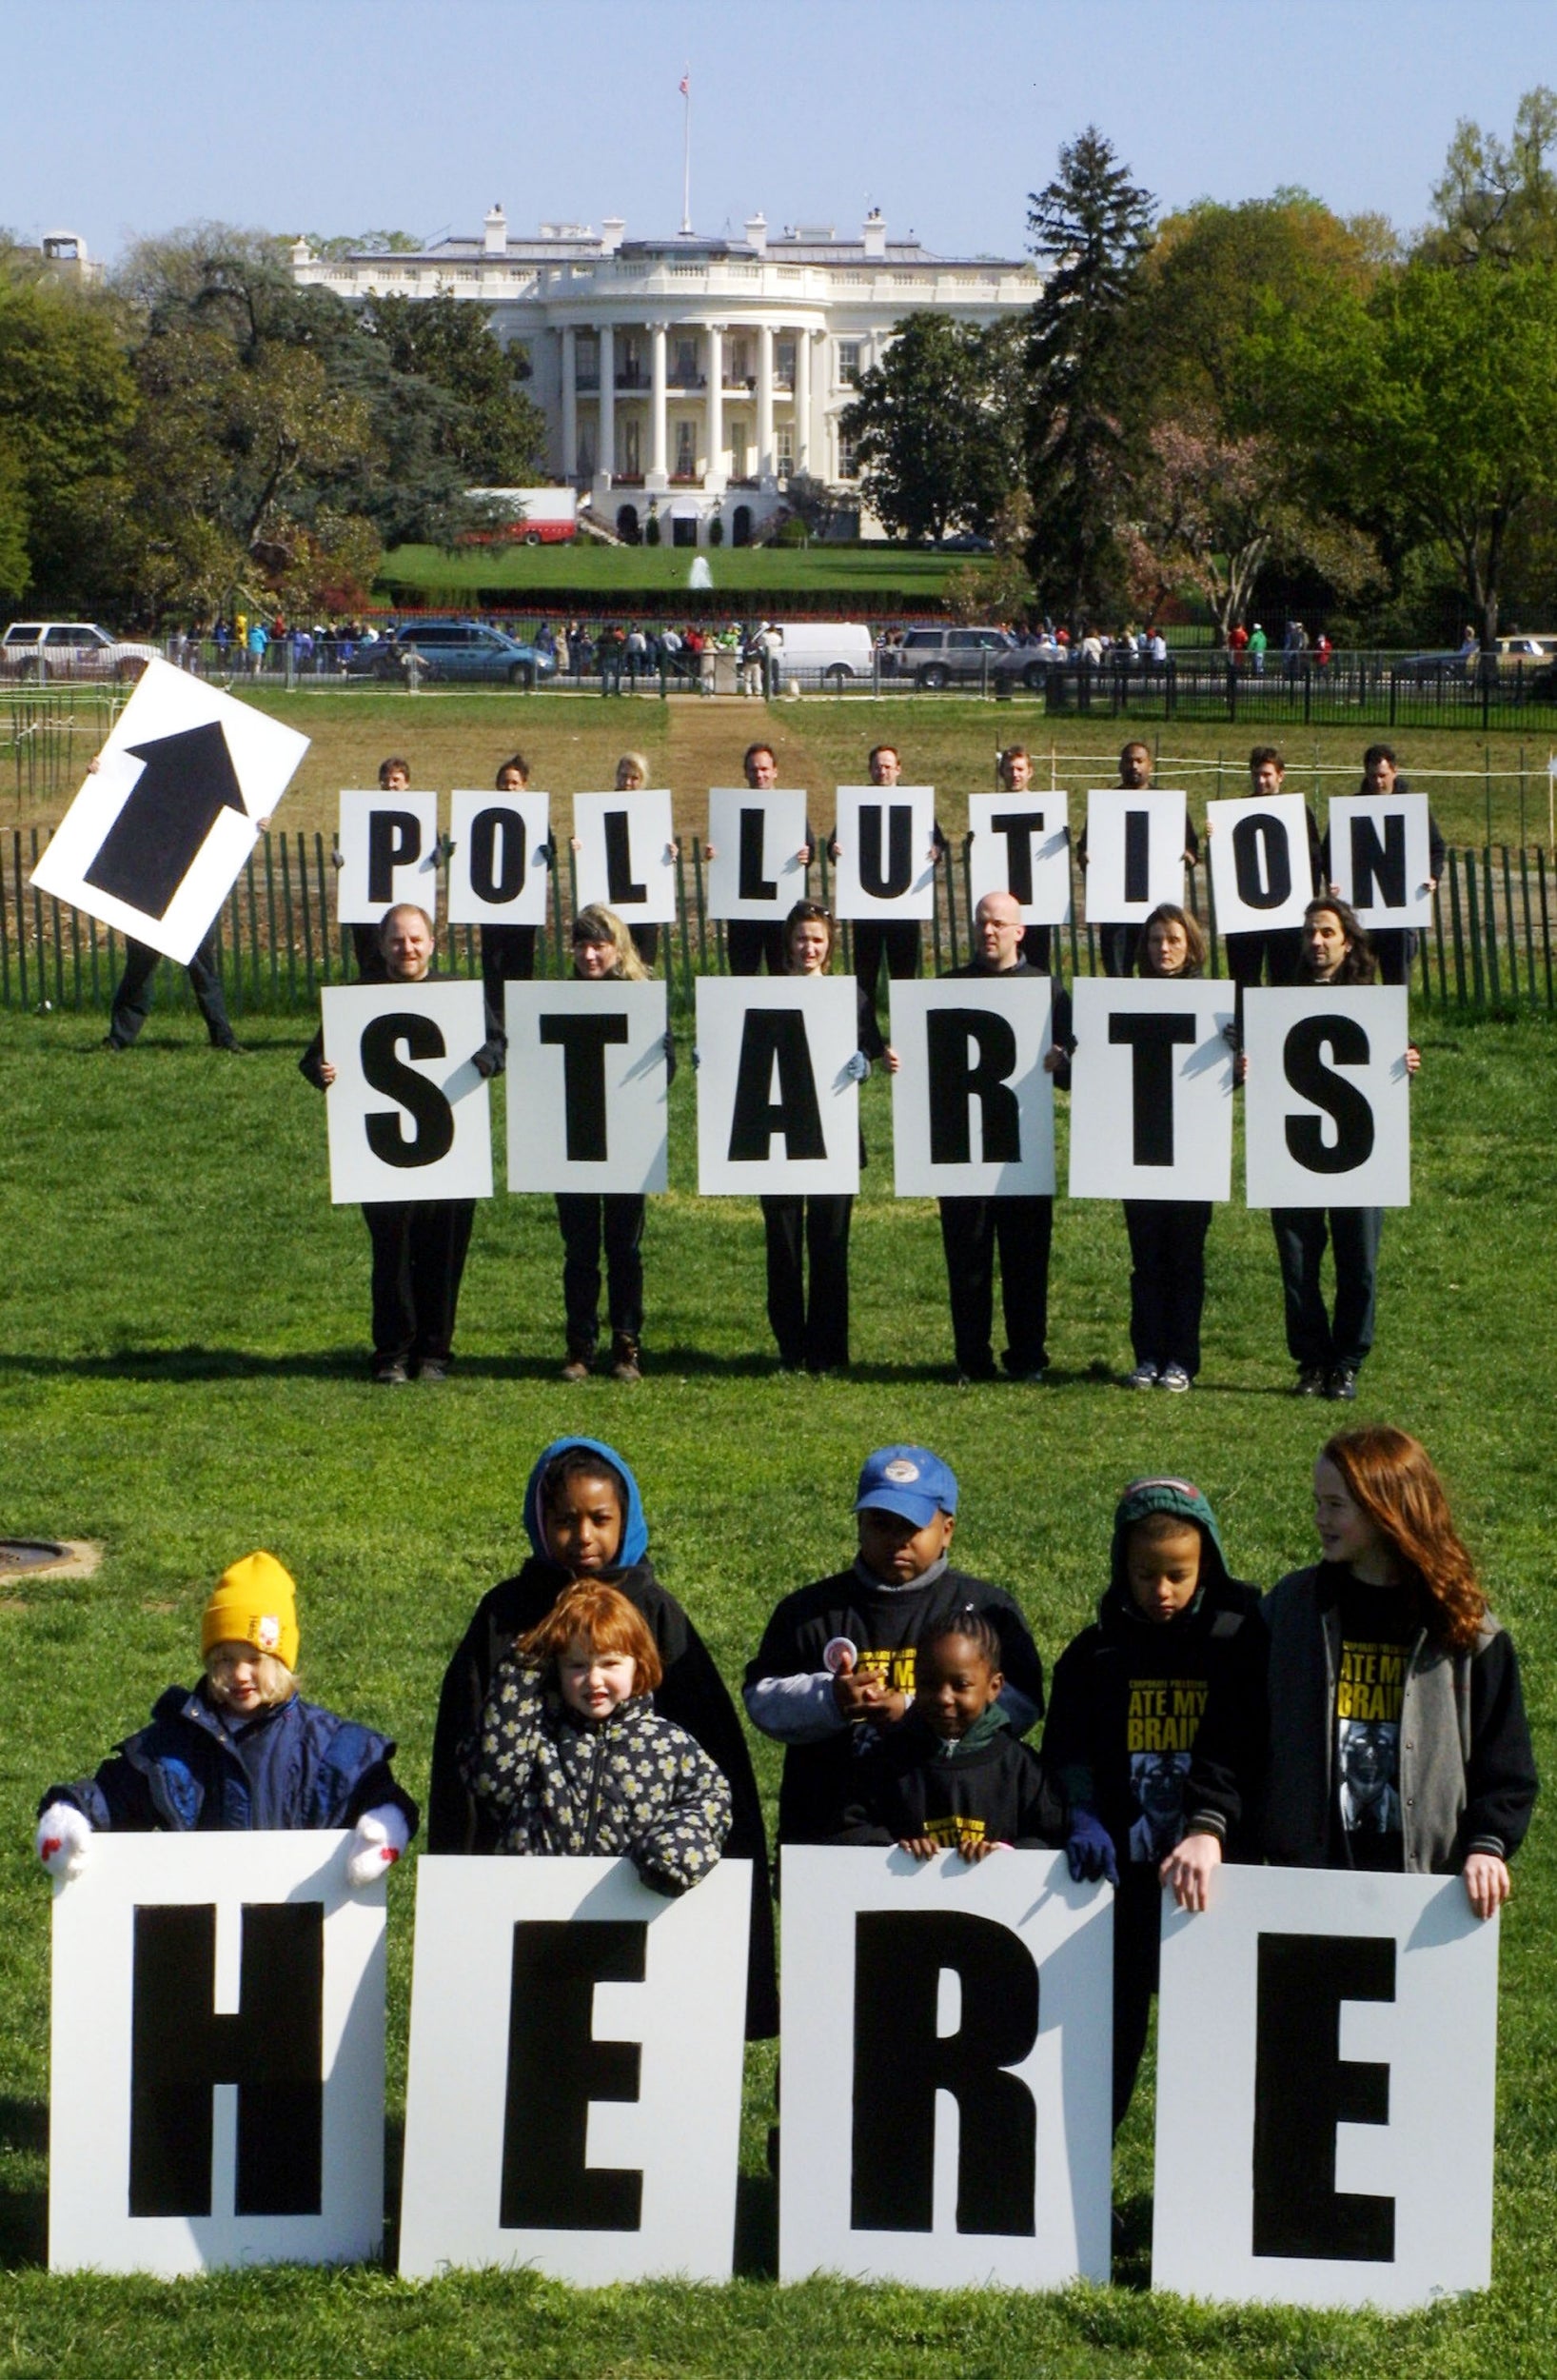 Members of Greenpeace hold banners during the "Take Back the Earth Day" rally to protest President Bush's environmental policies and protocols outside the White House in 2001 (Photo by Alex Wong/Newsmakers)